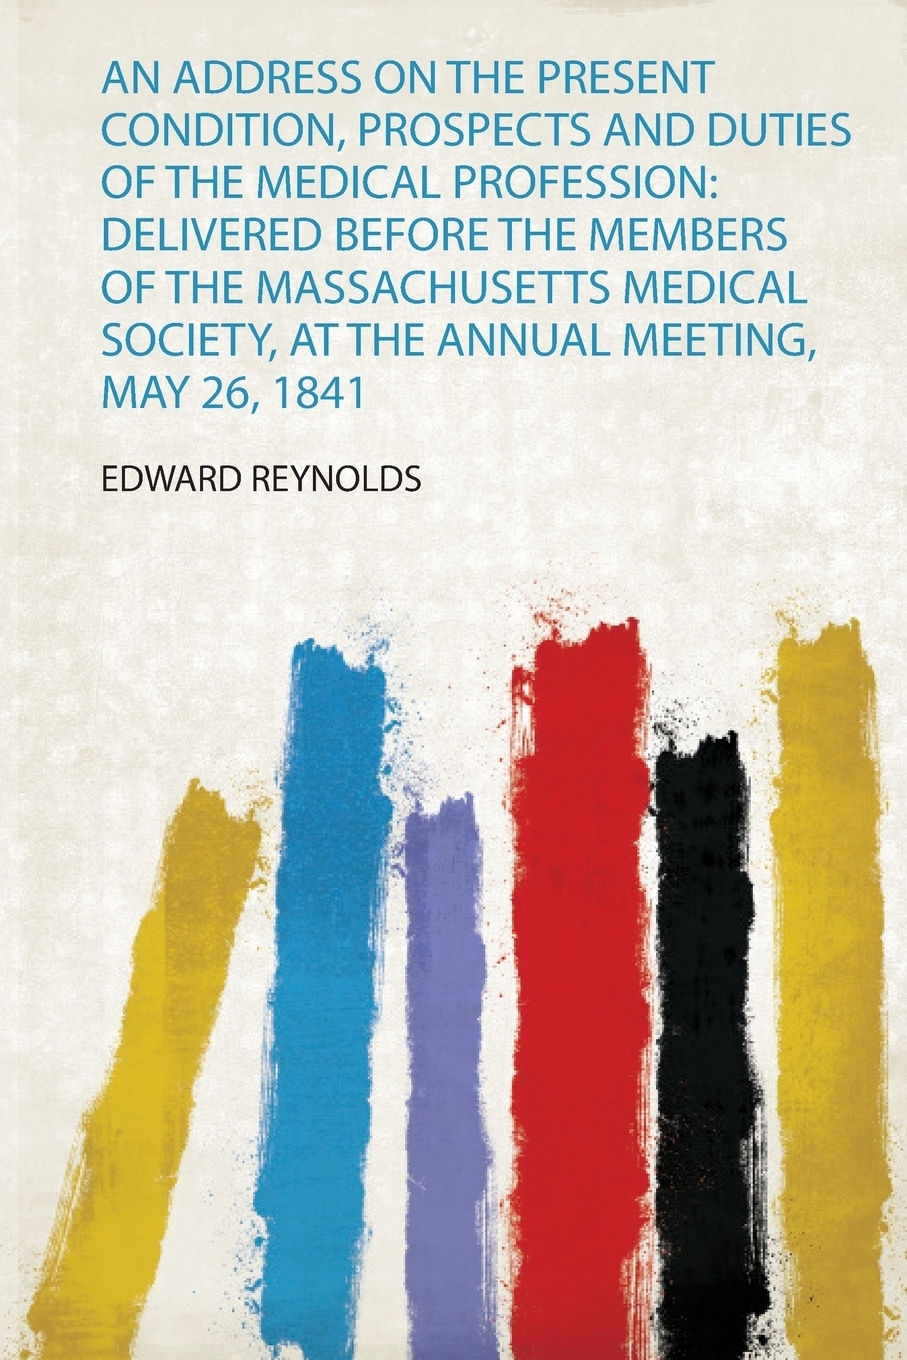 An Address on the Present Condition, Prospects and Duties of the Medical Profession. Delivered Before the Members of the Massachusetts Medical Society, at the Annual Meeting, May 26, 1841